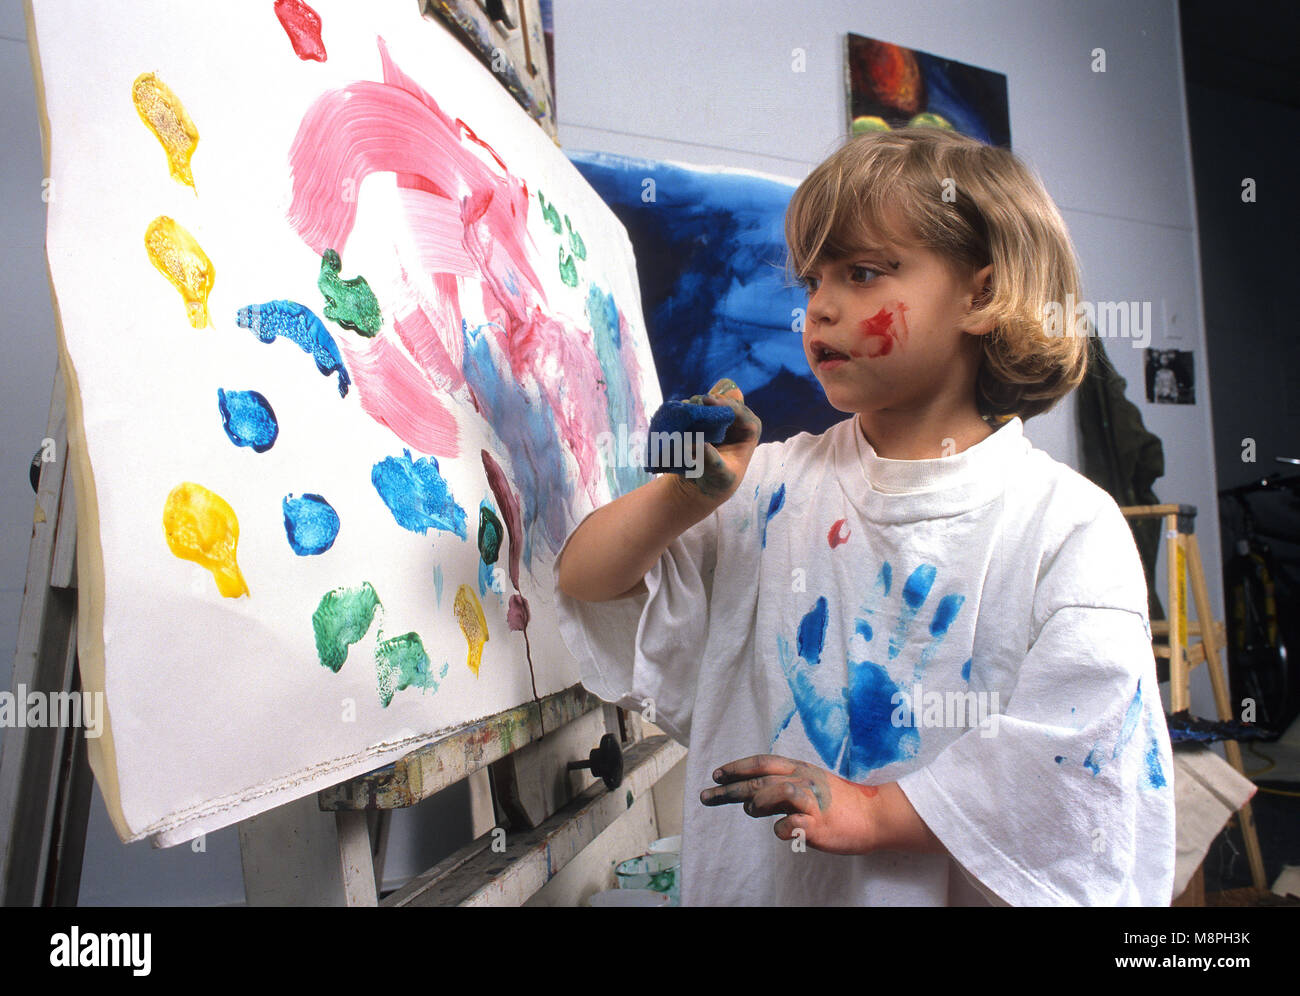 A young girl spongepainting Stock Photo